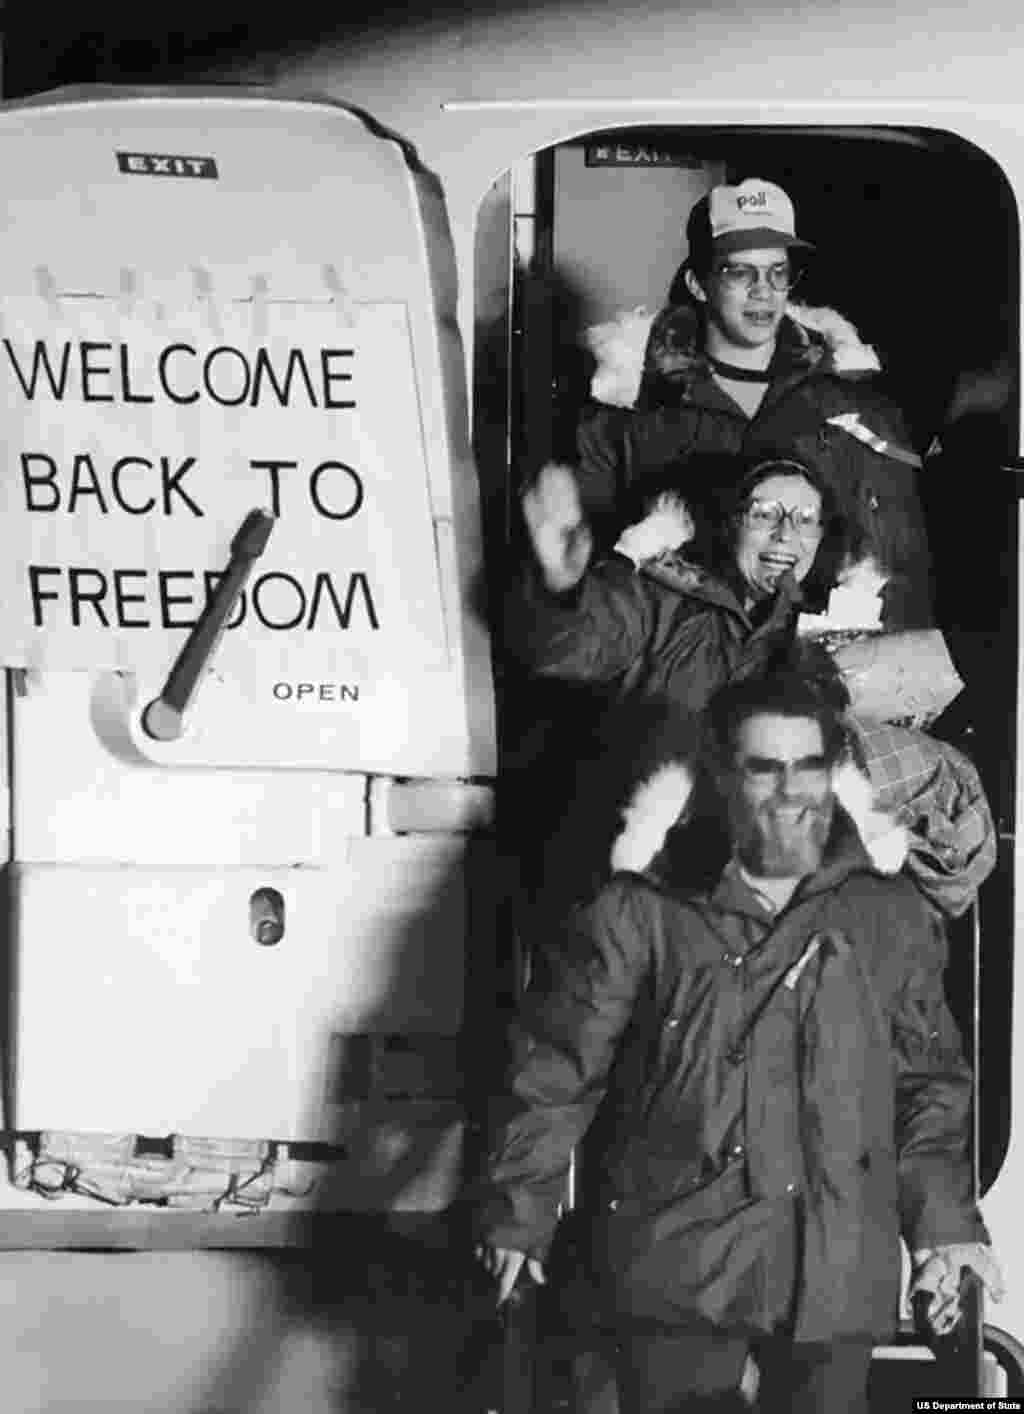 Finally freed after a tortuous negotiation process mediated by Algeria, the 52 remaining hostages arrive in Wiesbaden, West Germany, on January 20, 1981. The captives were released just minutes after Ronald Reagan was sworn in as U.S. president. Fourteen hostages had been released over the previous year, including one for medical reasons.